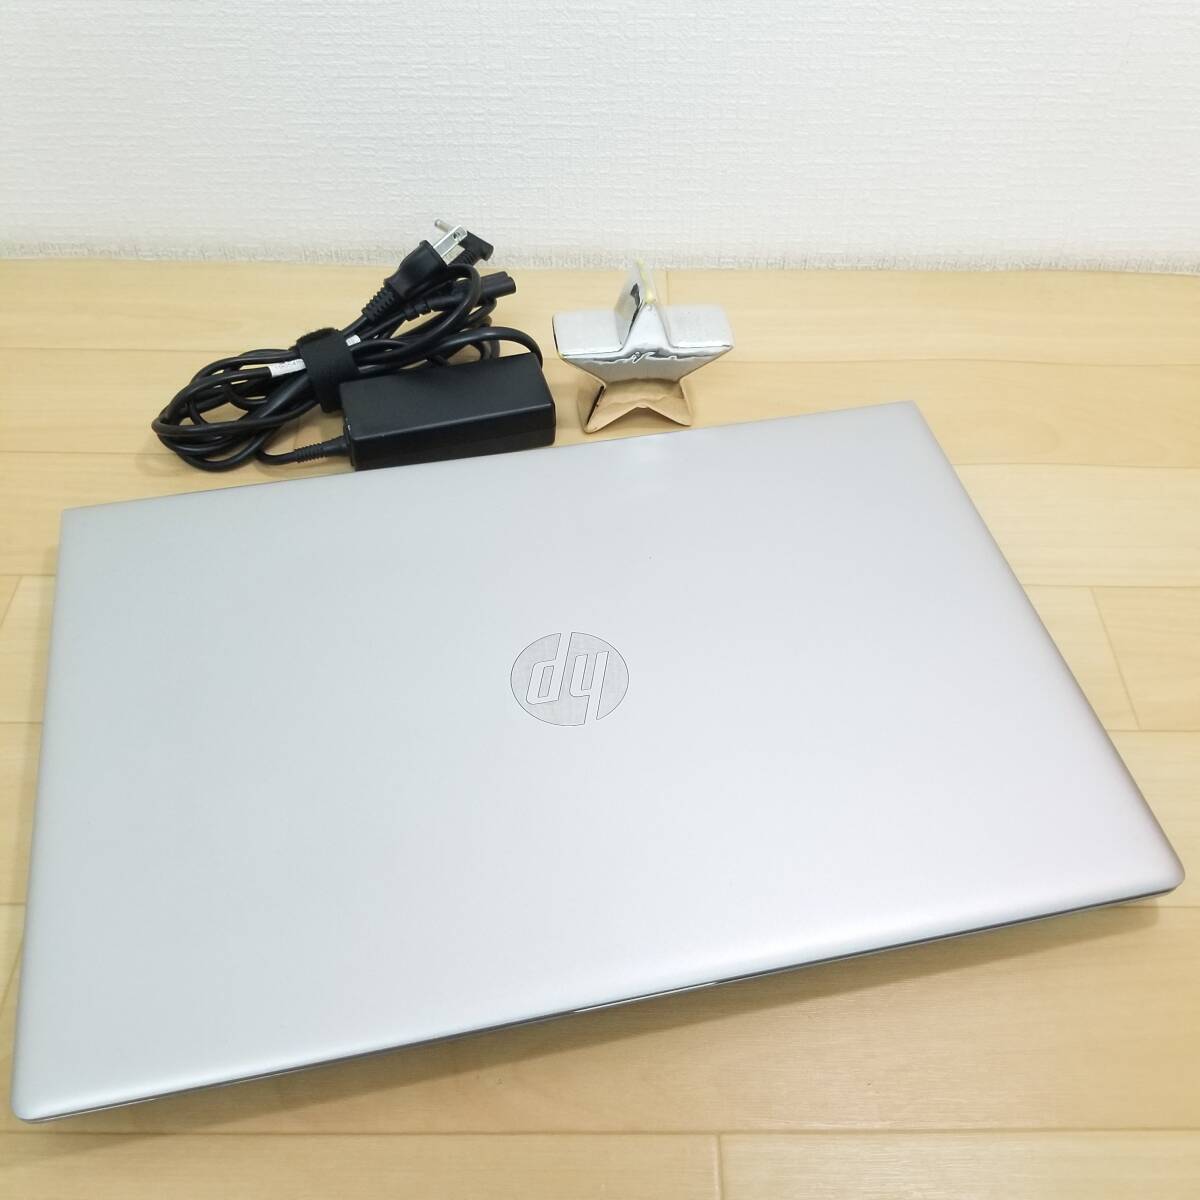 2019 year sale model / beautiful goods / prompt decision with special favor! no. 8 generation i5/ new goods SSD* memory 16GB installing /Web camera /Office/ Speed shipping /Win11/ immediately use possible Note PC(D6404)